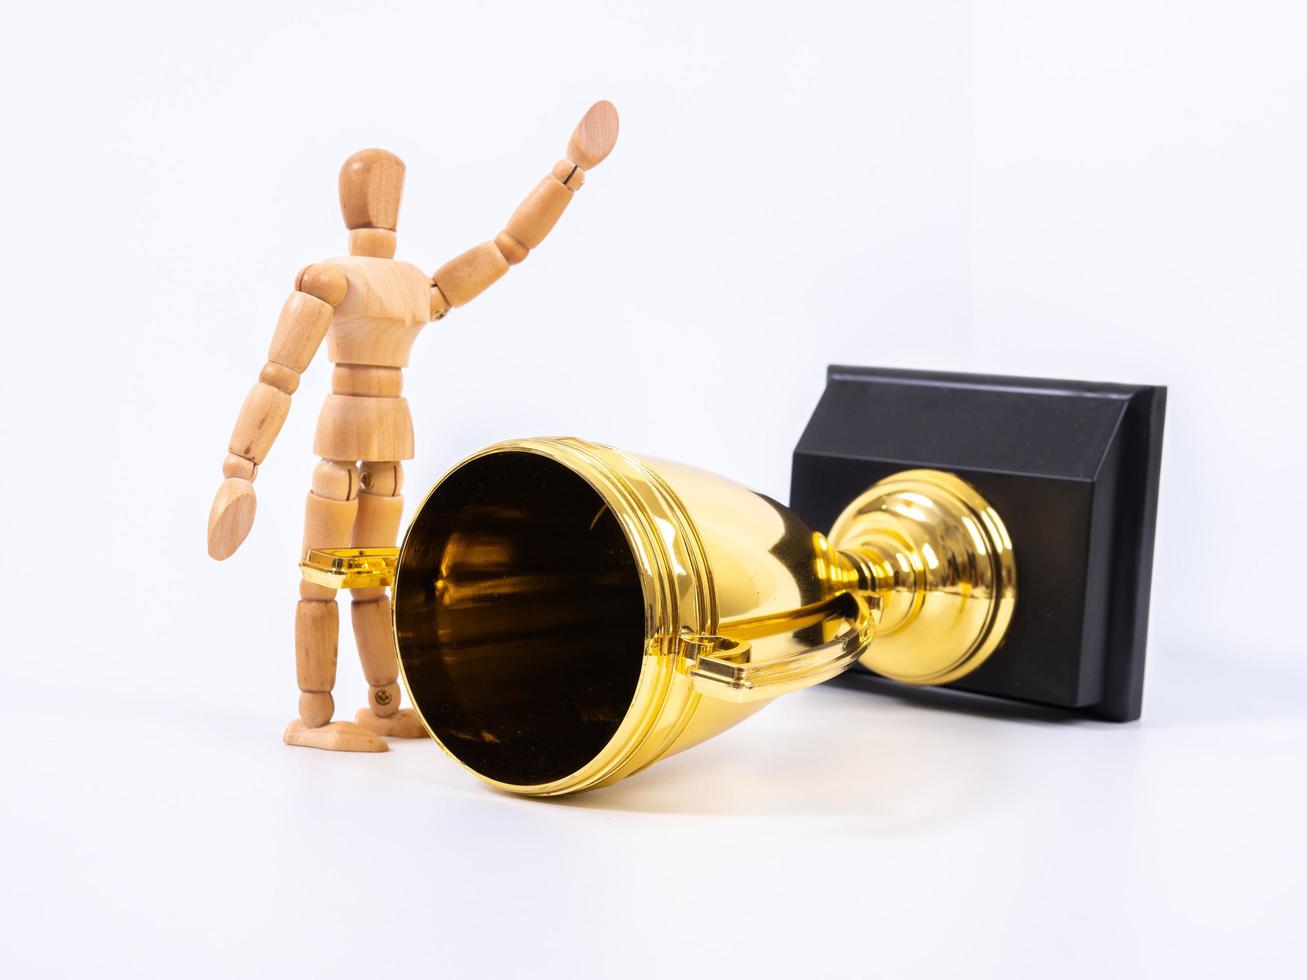 Wooden toy figure and golden trophy cup on white background photo